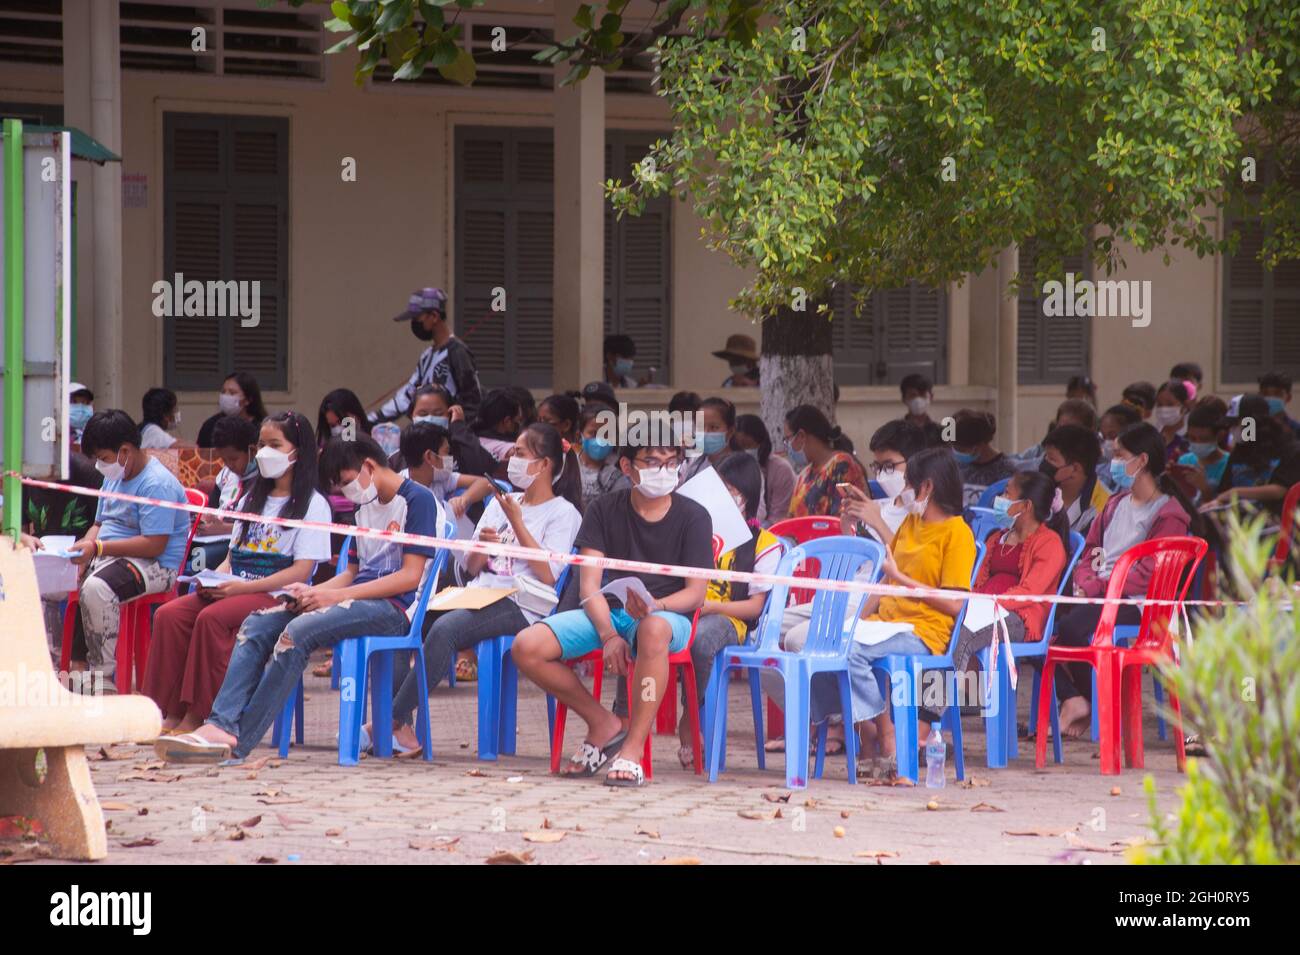 Phnom Penh, Cambodia. Sept. 4th, 2021. for over a 1/2 year Phnom Penh has been battling a COVID - 19 surge. the Cambodian government stays on course w/ its vaccination program for 12 through 17 year olds. teenagers, in protective face masks, wait their turn for inoculation. credit: Kraig Lieb / Alamy Live News. Stock Photo